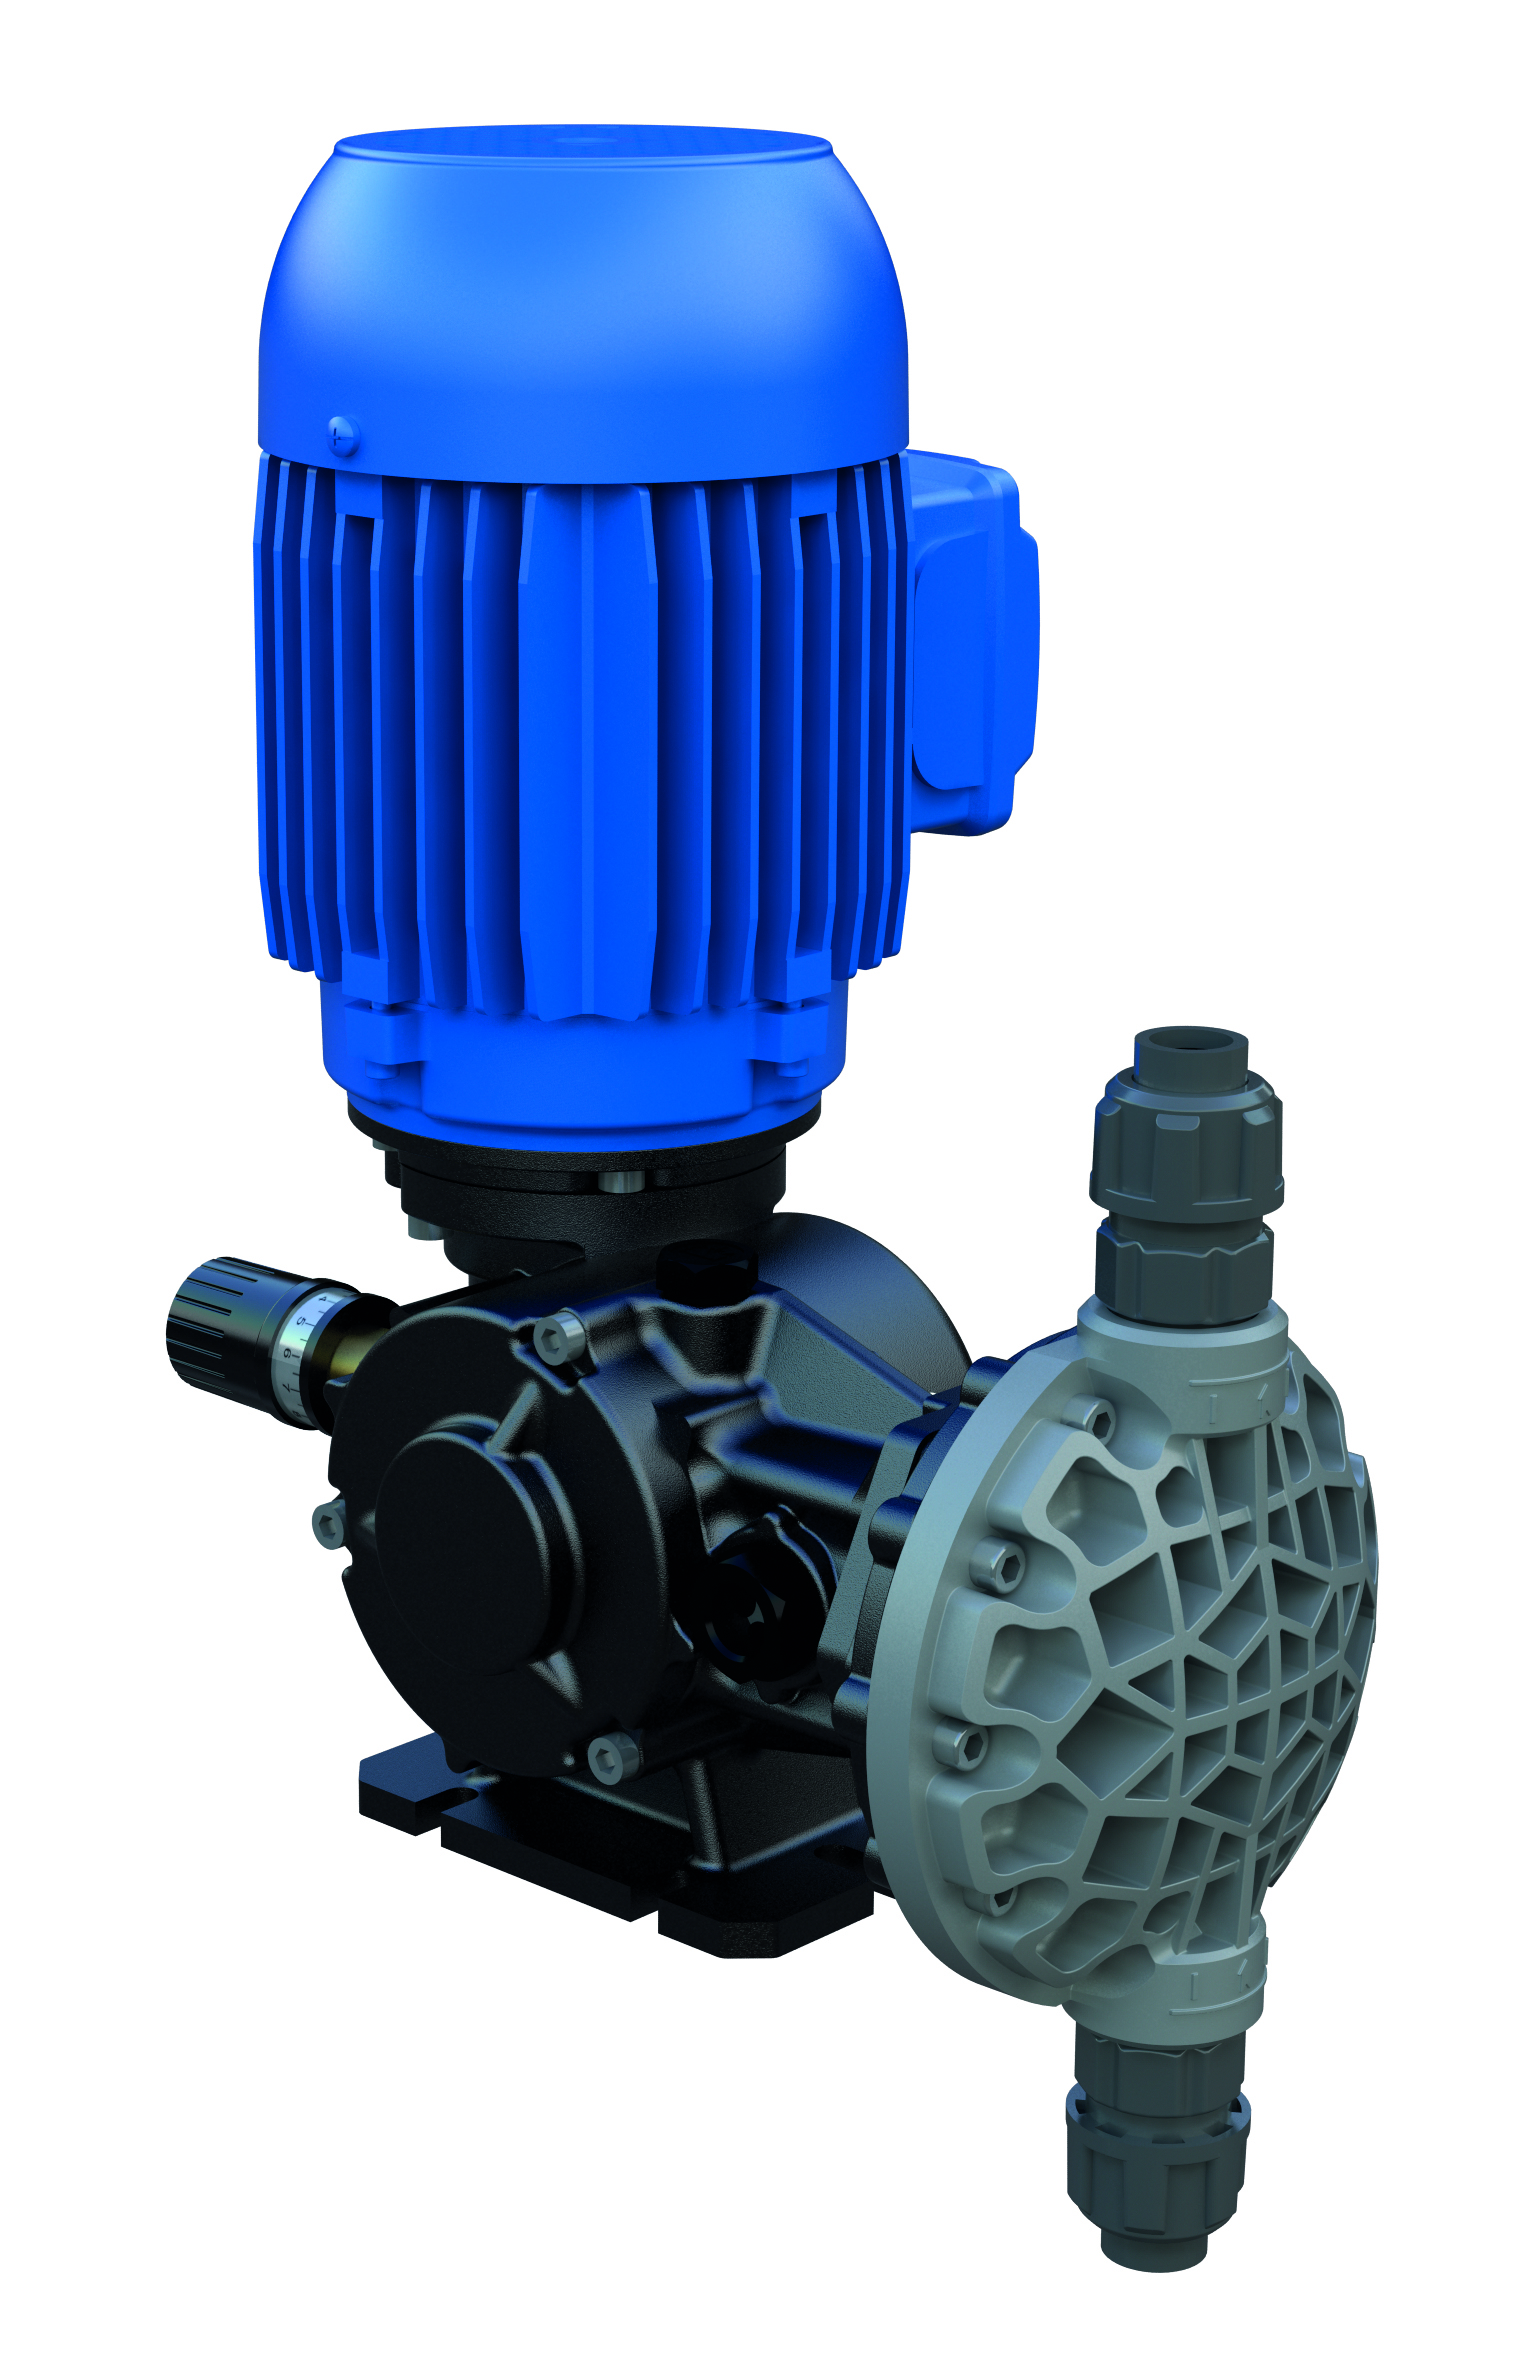 The AVS device is integrated into the Spring MS1 mechanical diaphragm dosing pump.